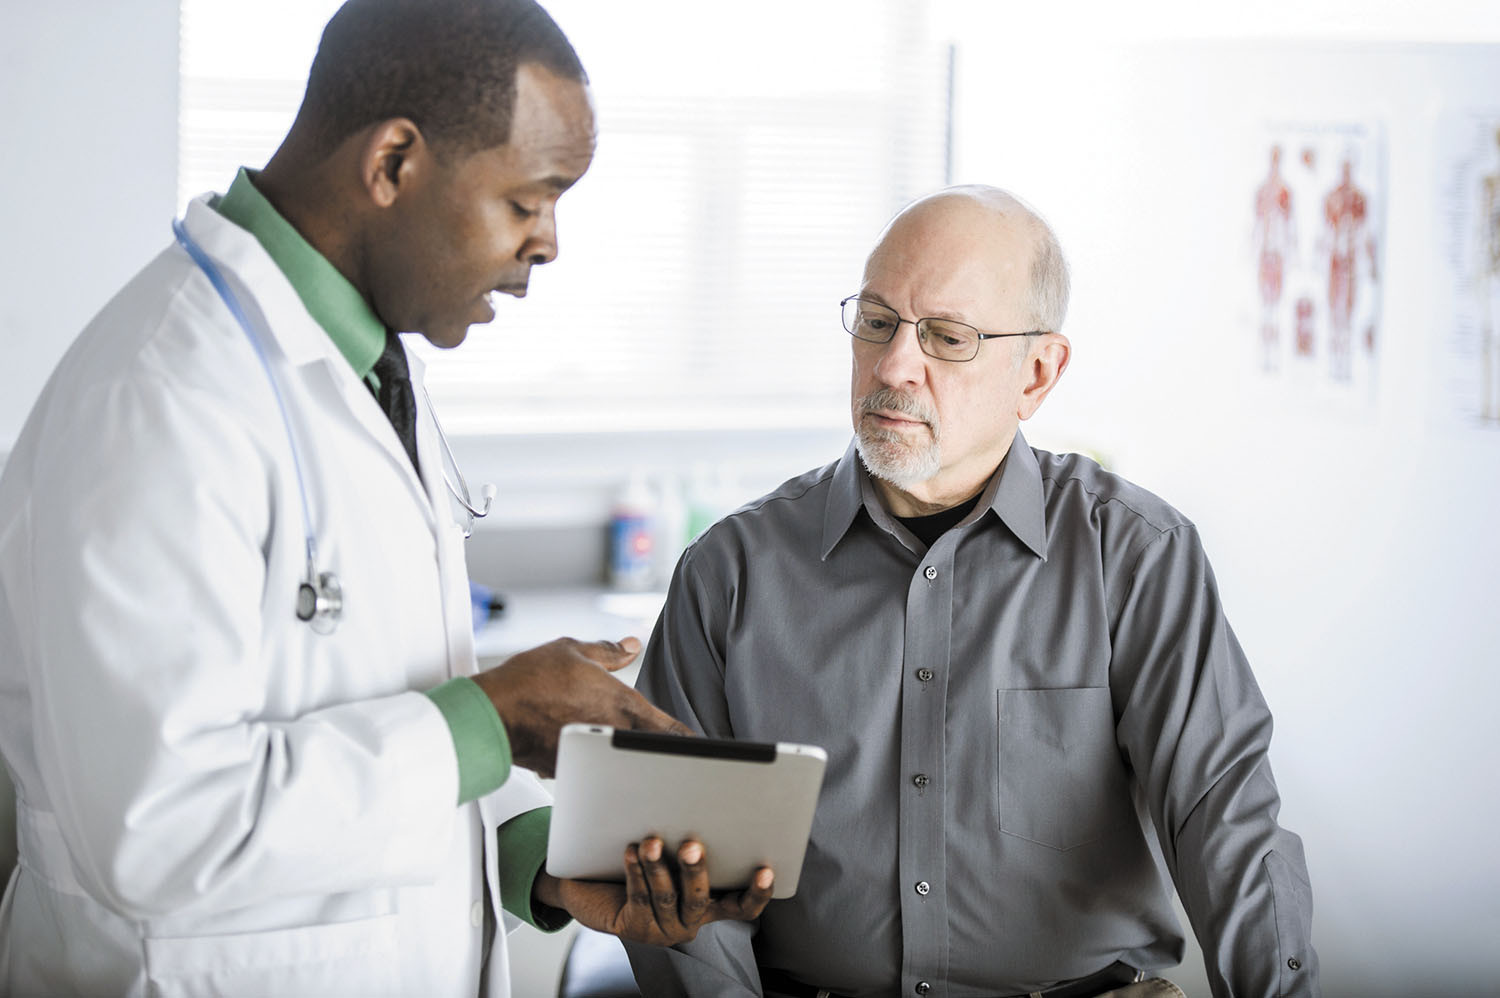 photo of a patient talking with a doctor, doctor is holding a tablet and pointing to it as they talk